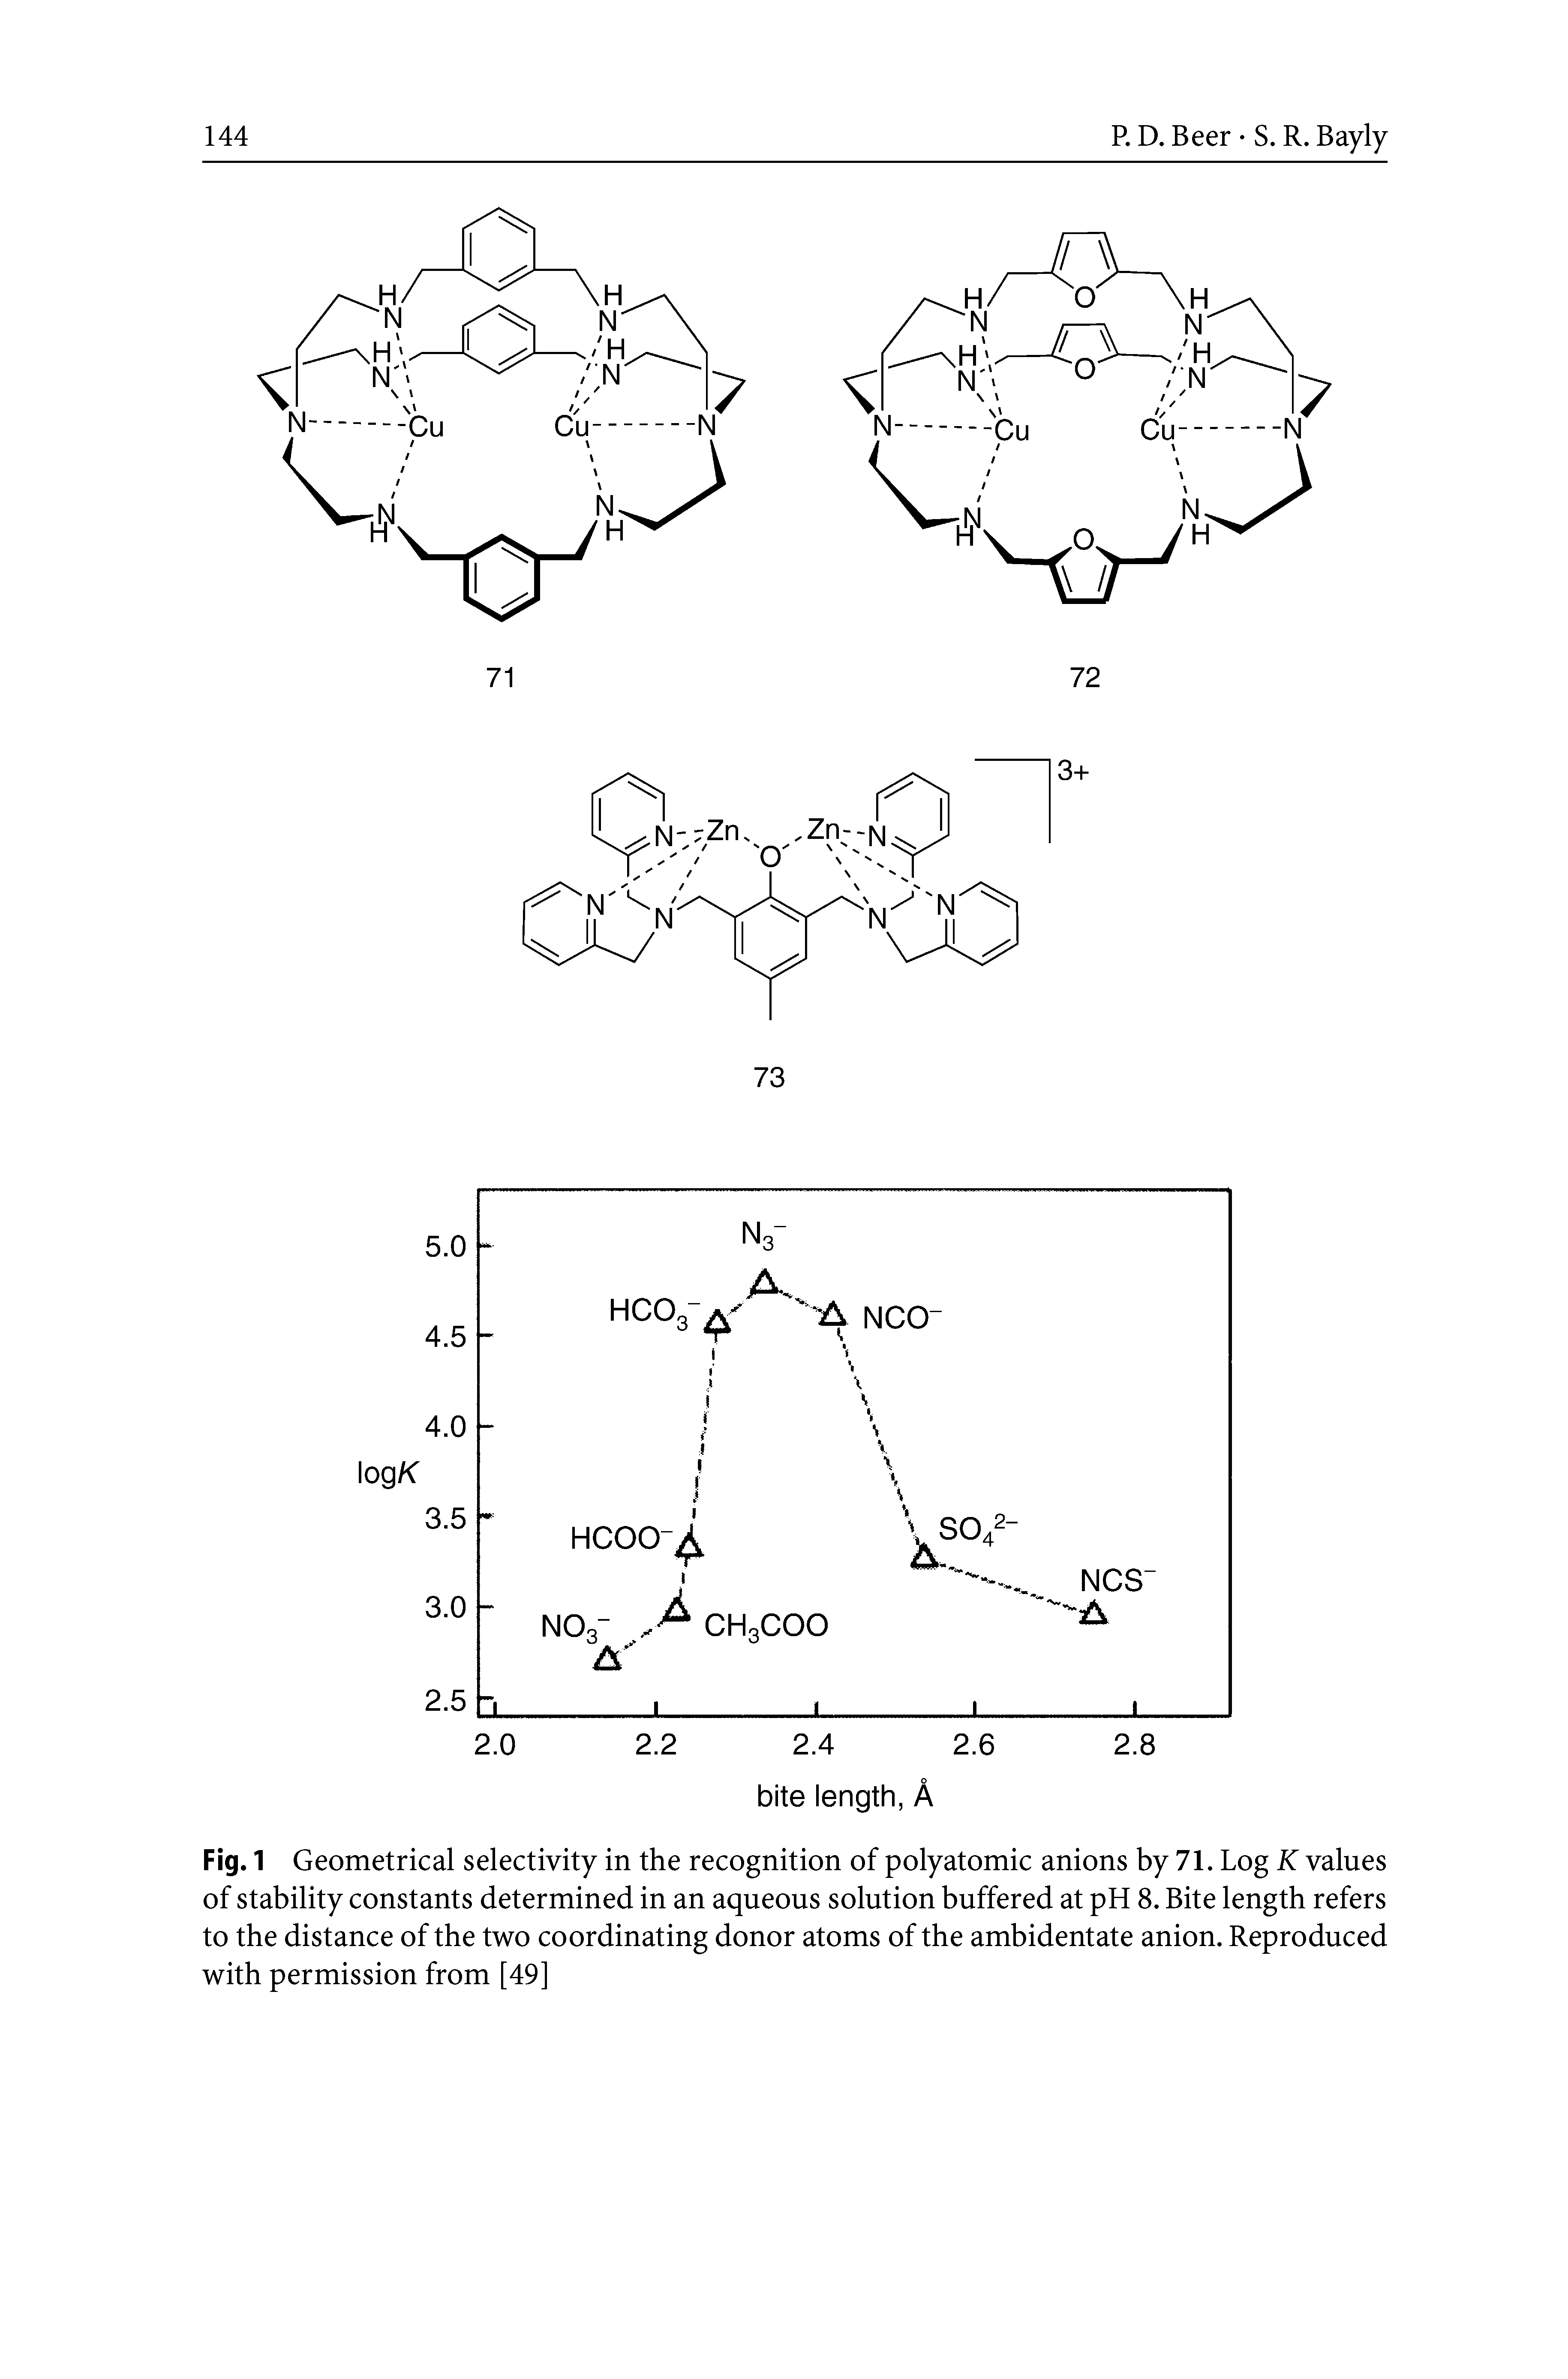 Fig. 1 Geometrical selectivity in the recognition of polyatomic anions by 71. Log K values of stability constants determined in an aqueous solution buffered at pH 8. Bite length refers to the distance of the two coordinating donor atoms of the ambidentate anion. Reproduced with permission from [49]...